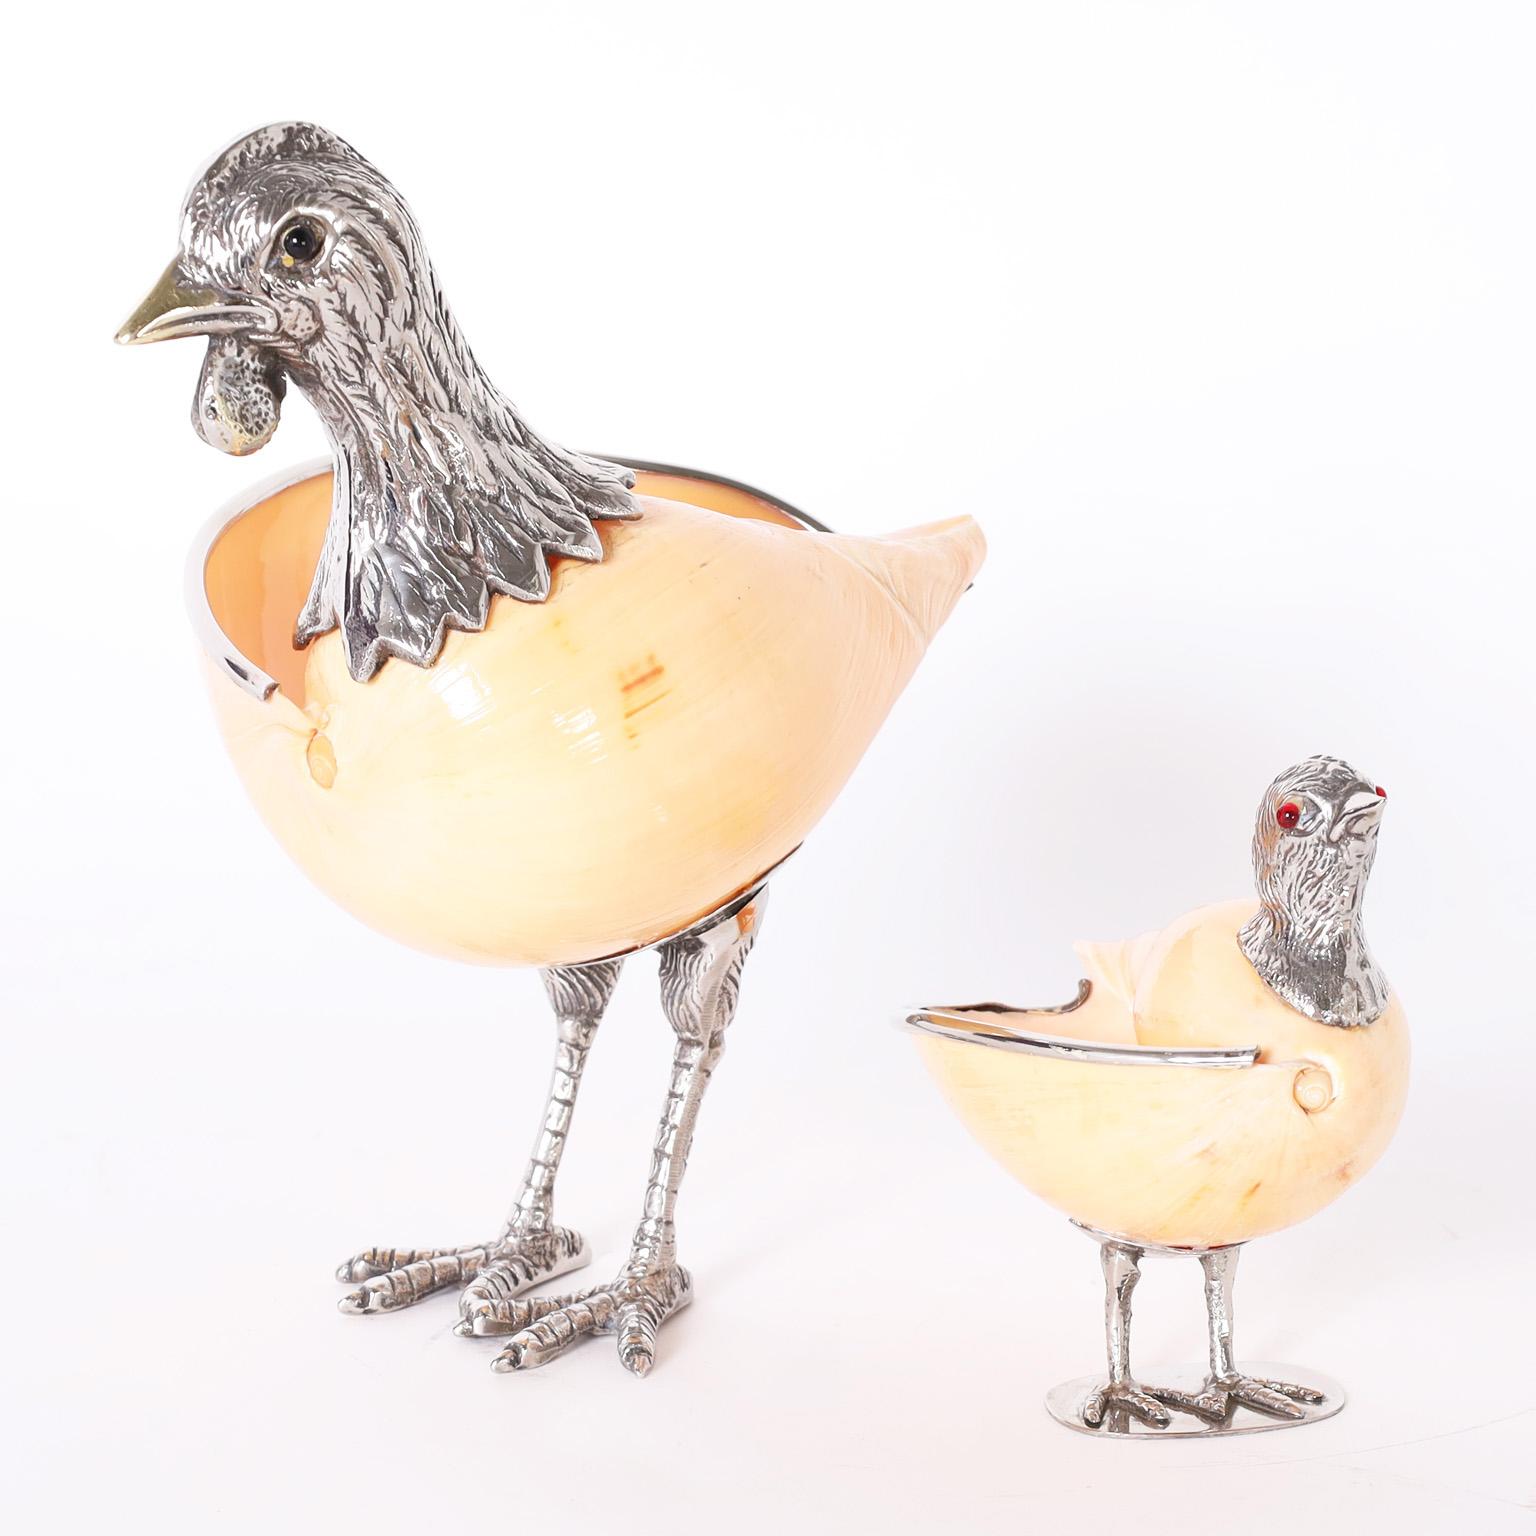 Two delightful sculptural bowls, a chicken and a chick crafted in shells and silver plated metal in the style of Binazzi. 

Large: H: 8.5 W: 8 D: 5 $1,150

Small: H: 4.5 W: 4.5 D: 3 $550 (SOLD)